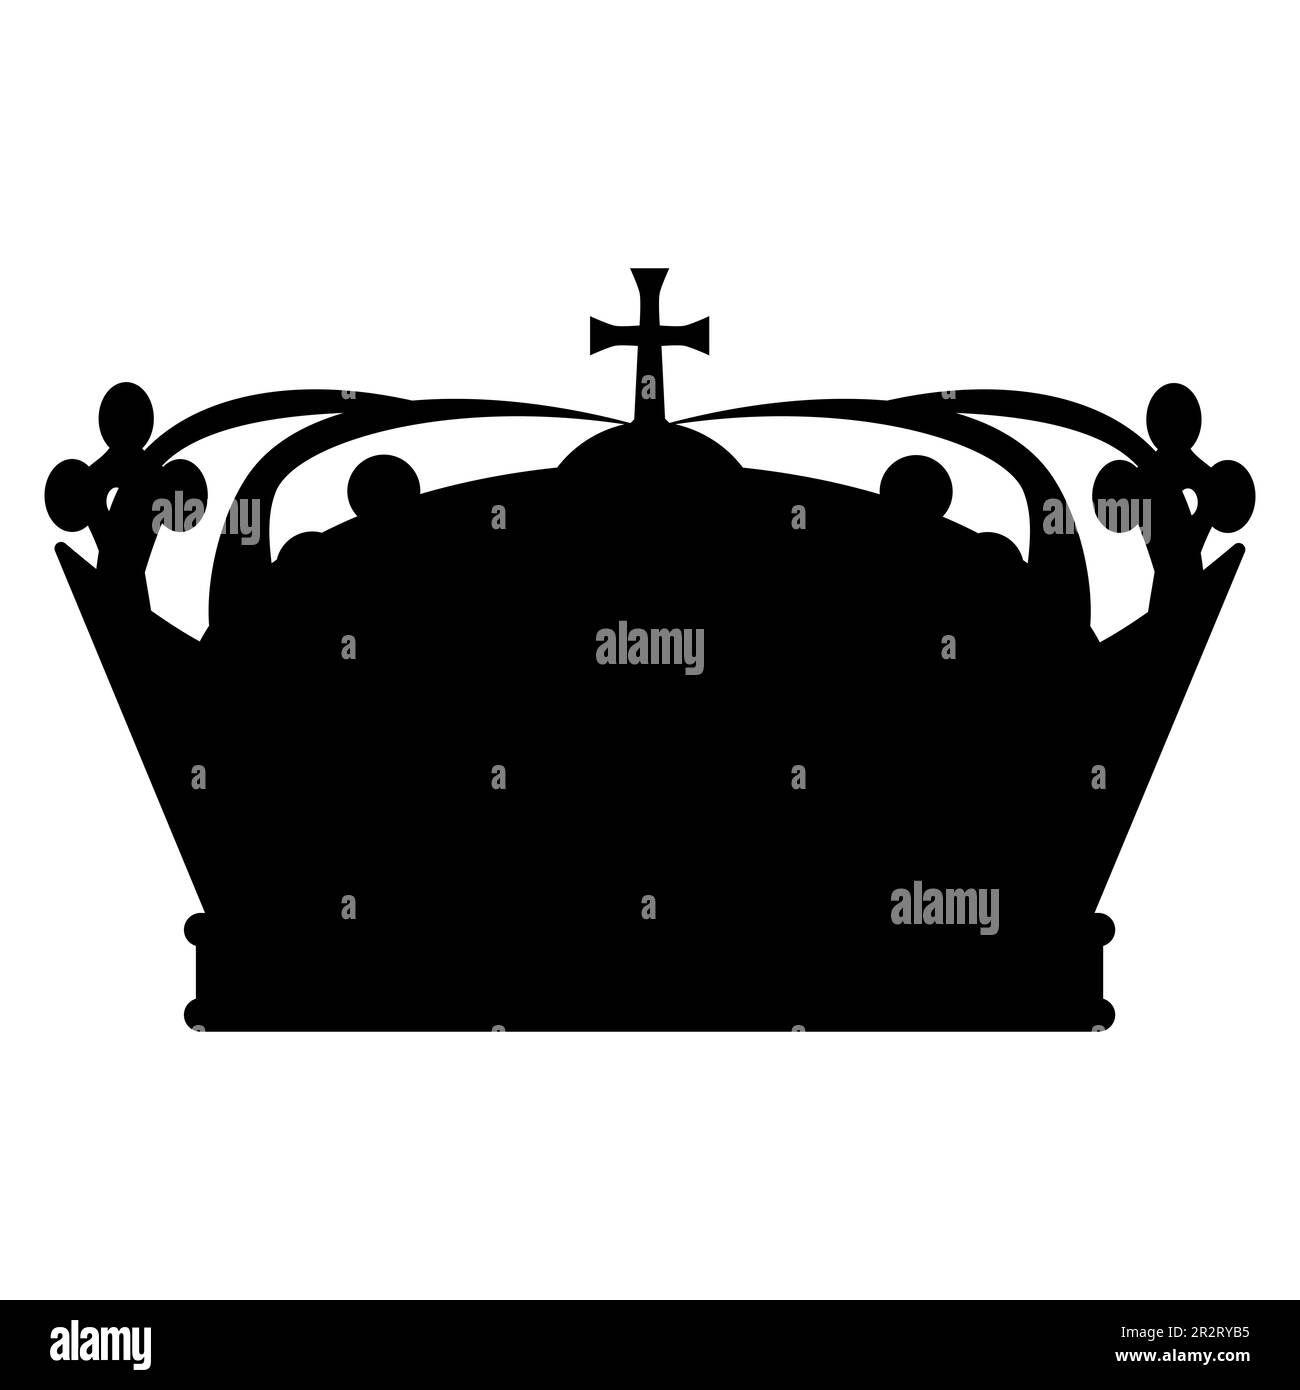 Crown silhouette. Classic royal symbol. Religion insignia. Christian cross. Vector illustration isolated on white background. Stock Vector